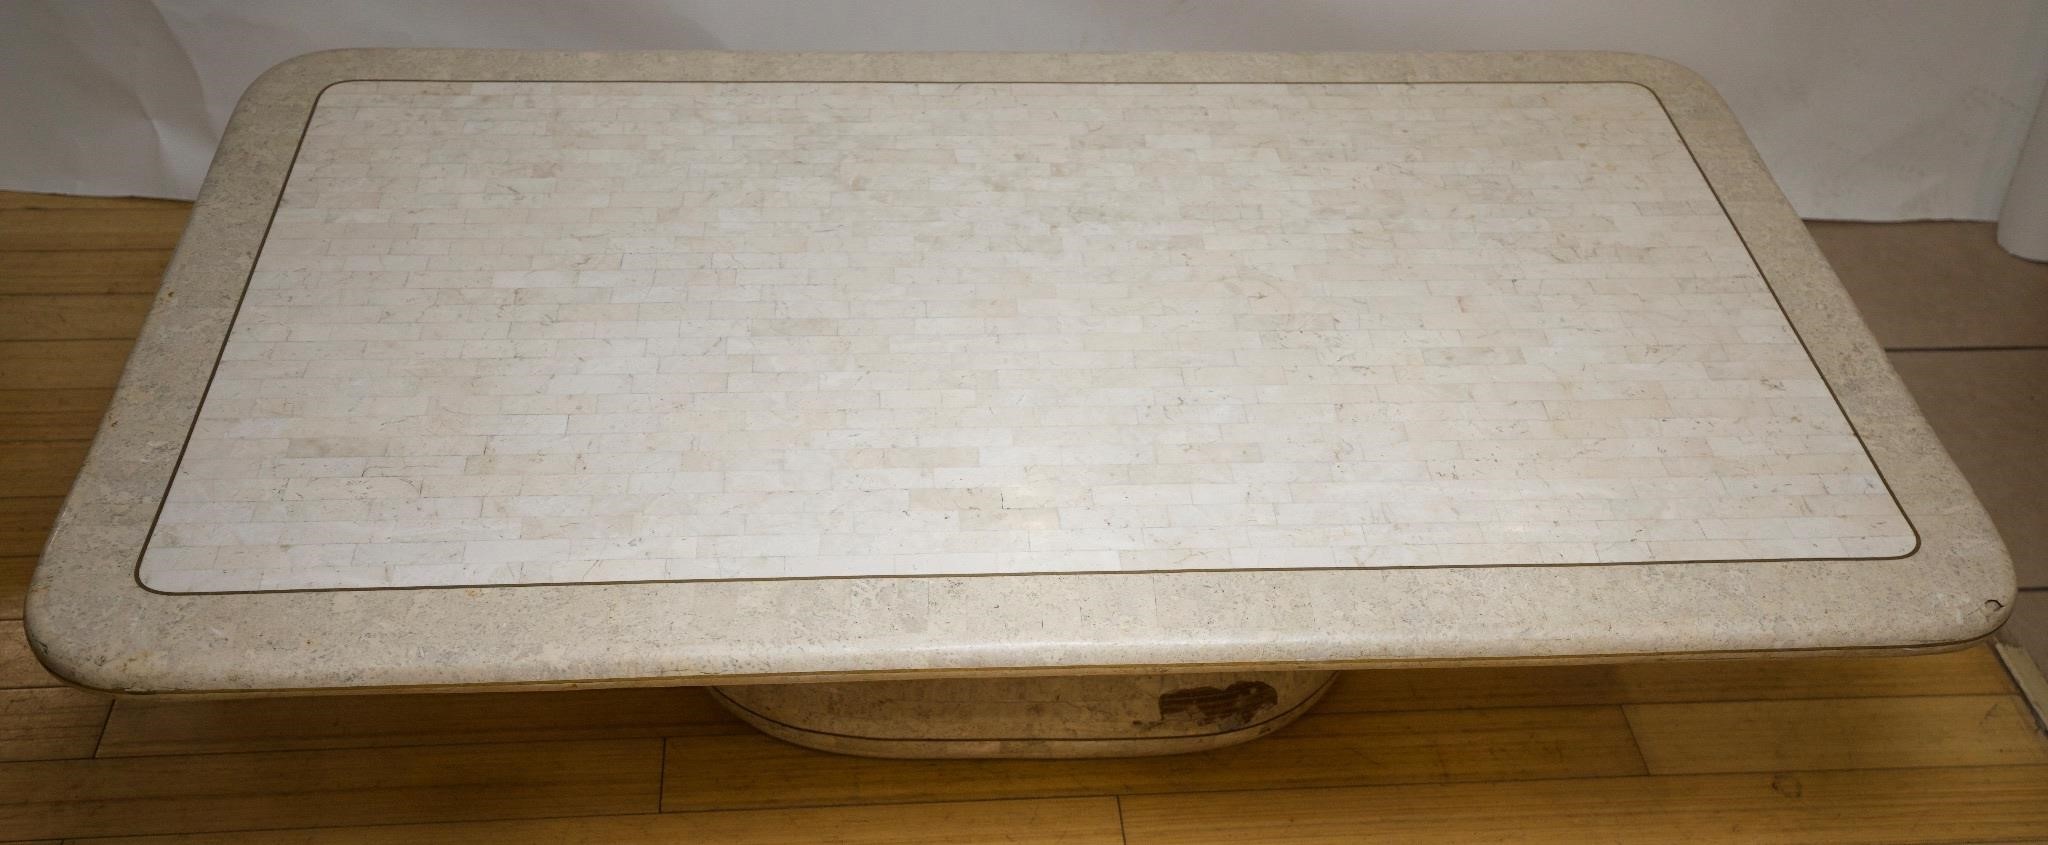 White Stone Table - Base is Chipped